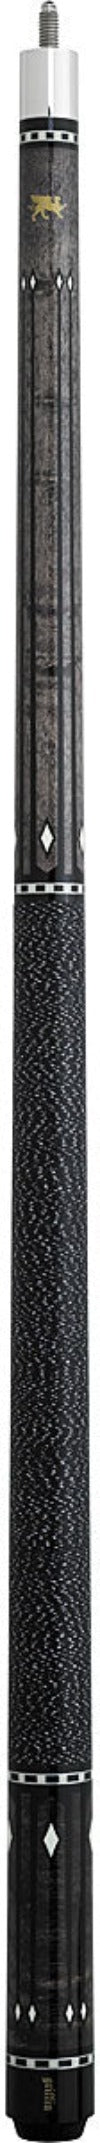 Griffin GR32 Pool Cue -Griffin